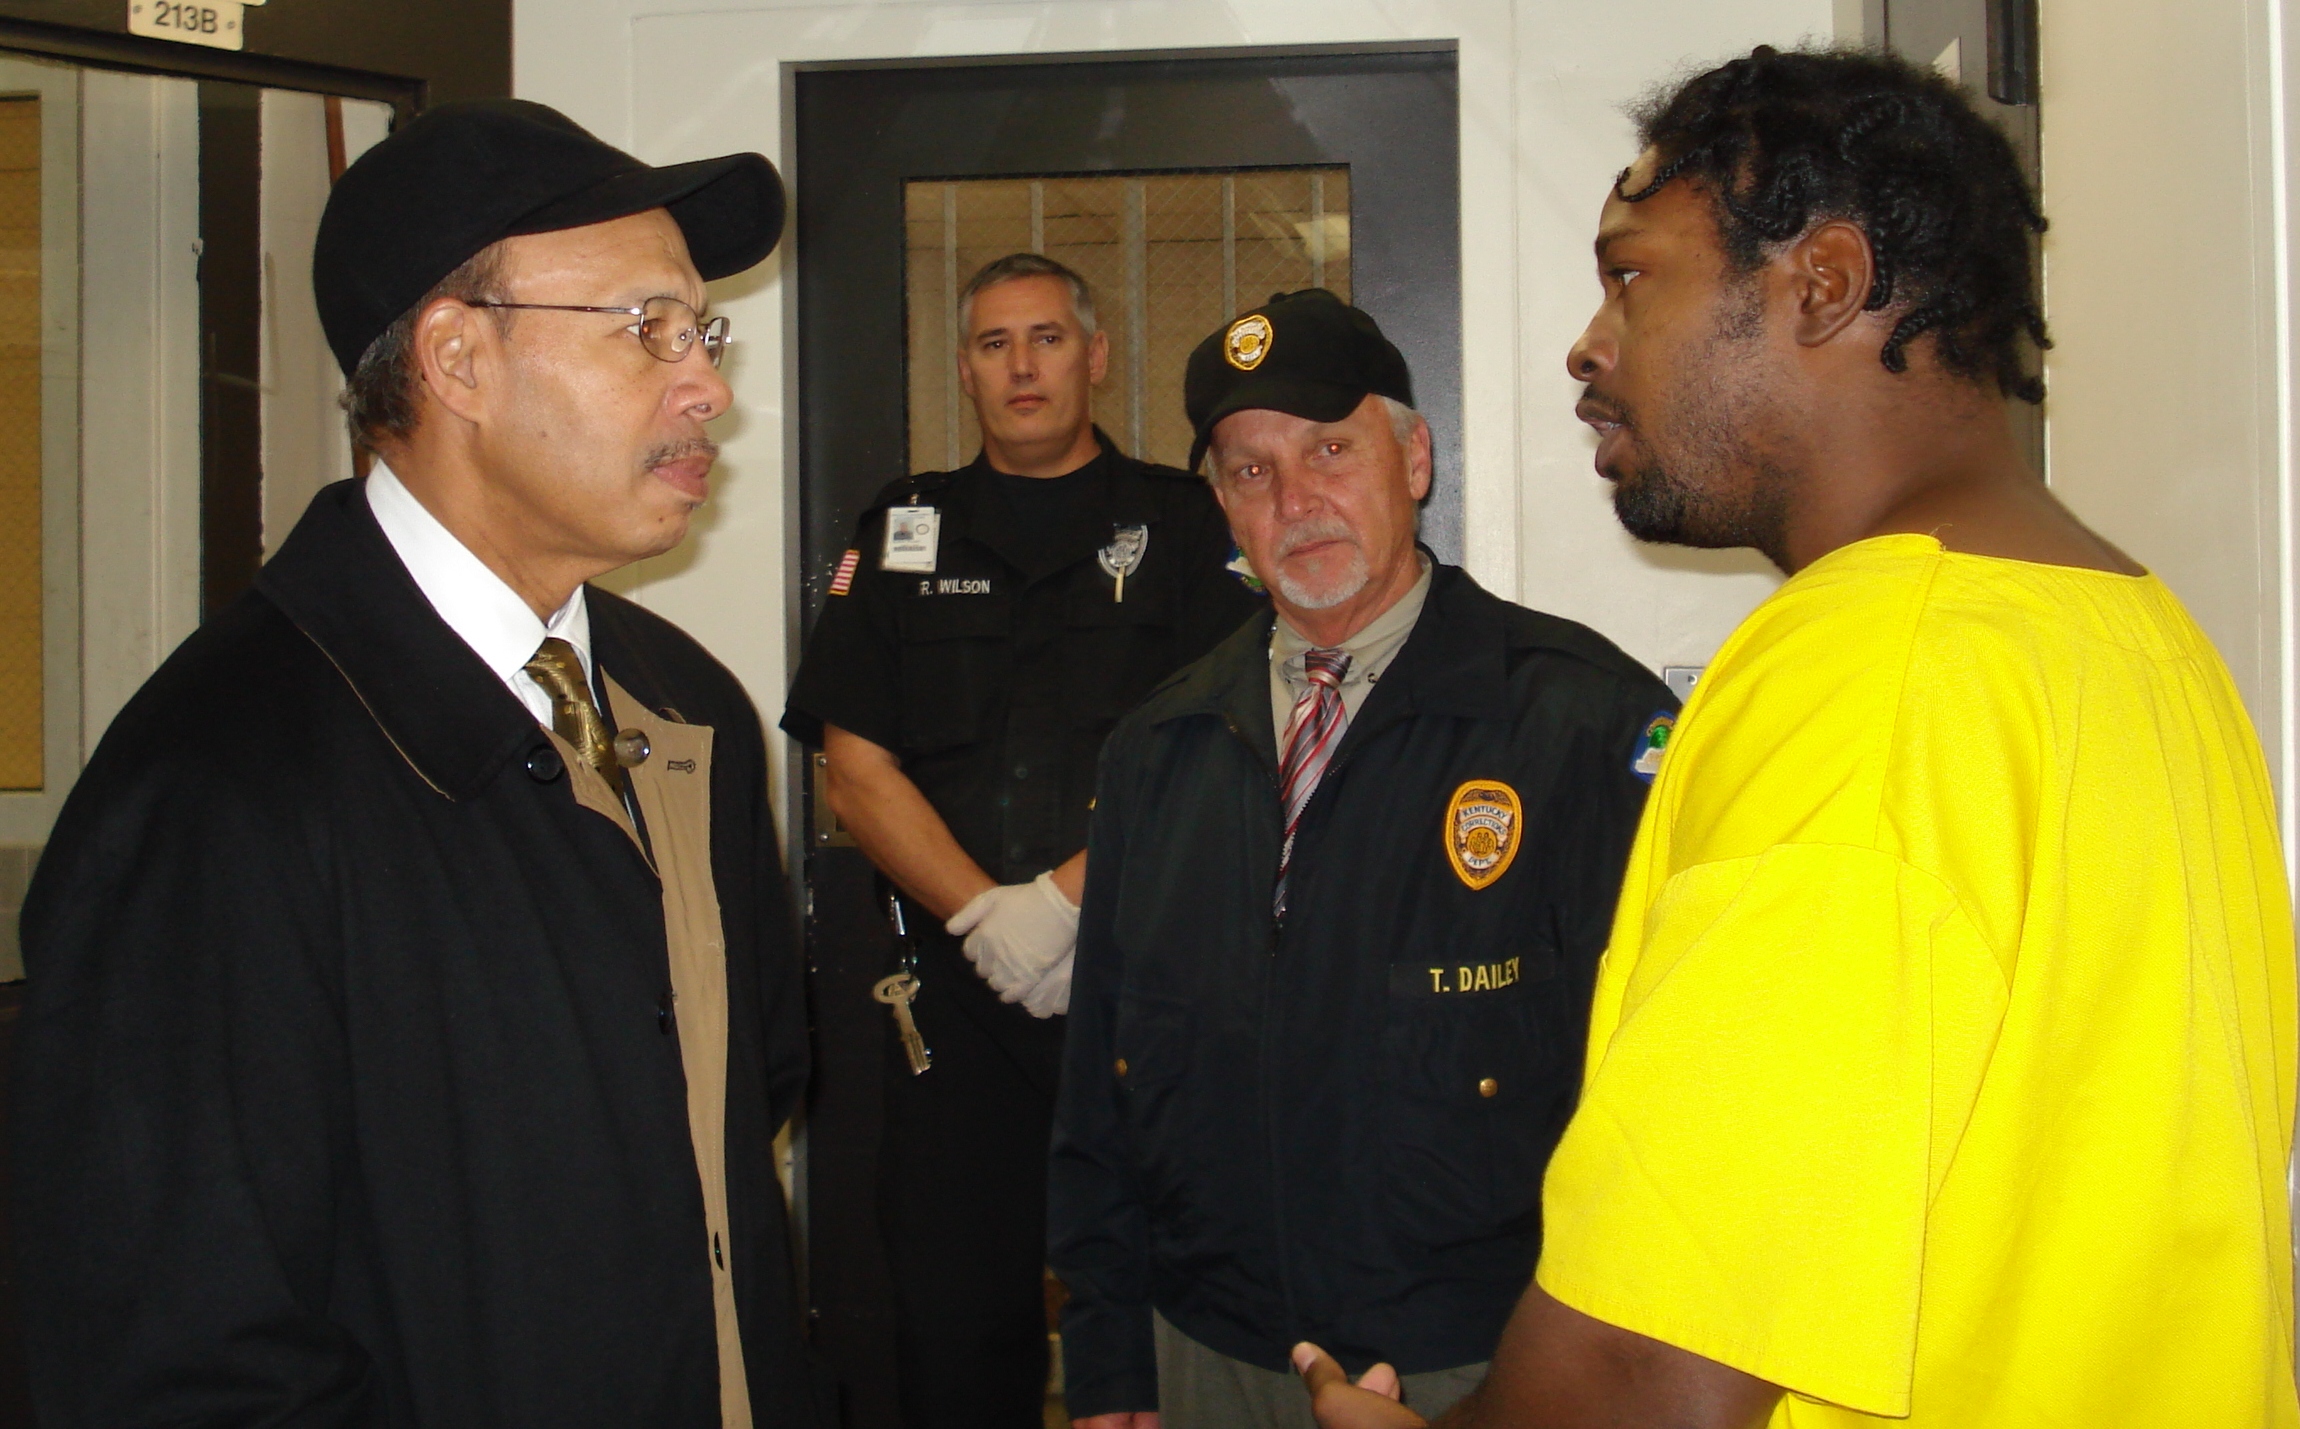 Secretary Brown talks with Warden Dailey and inmate Crawford